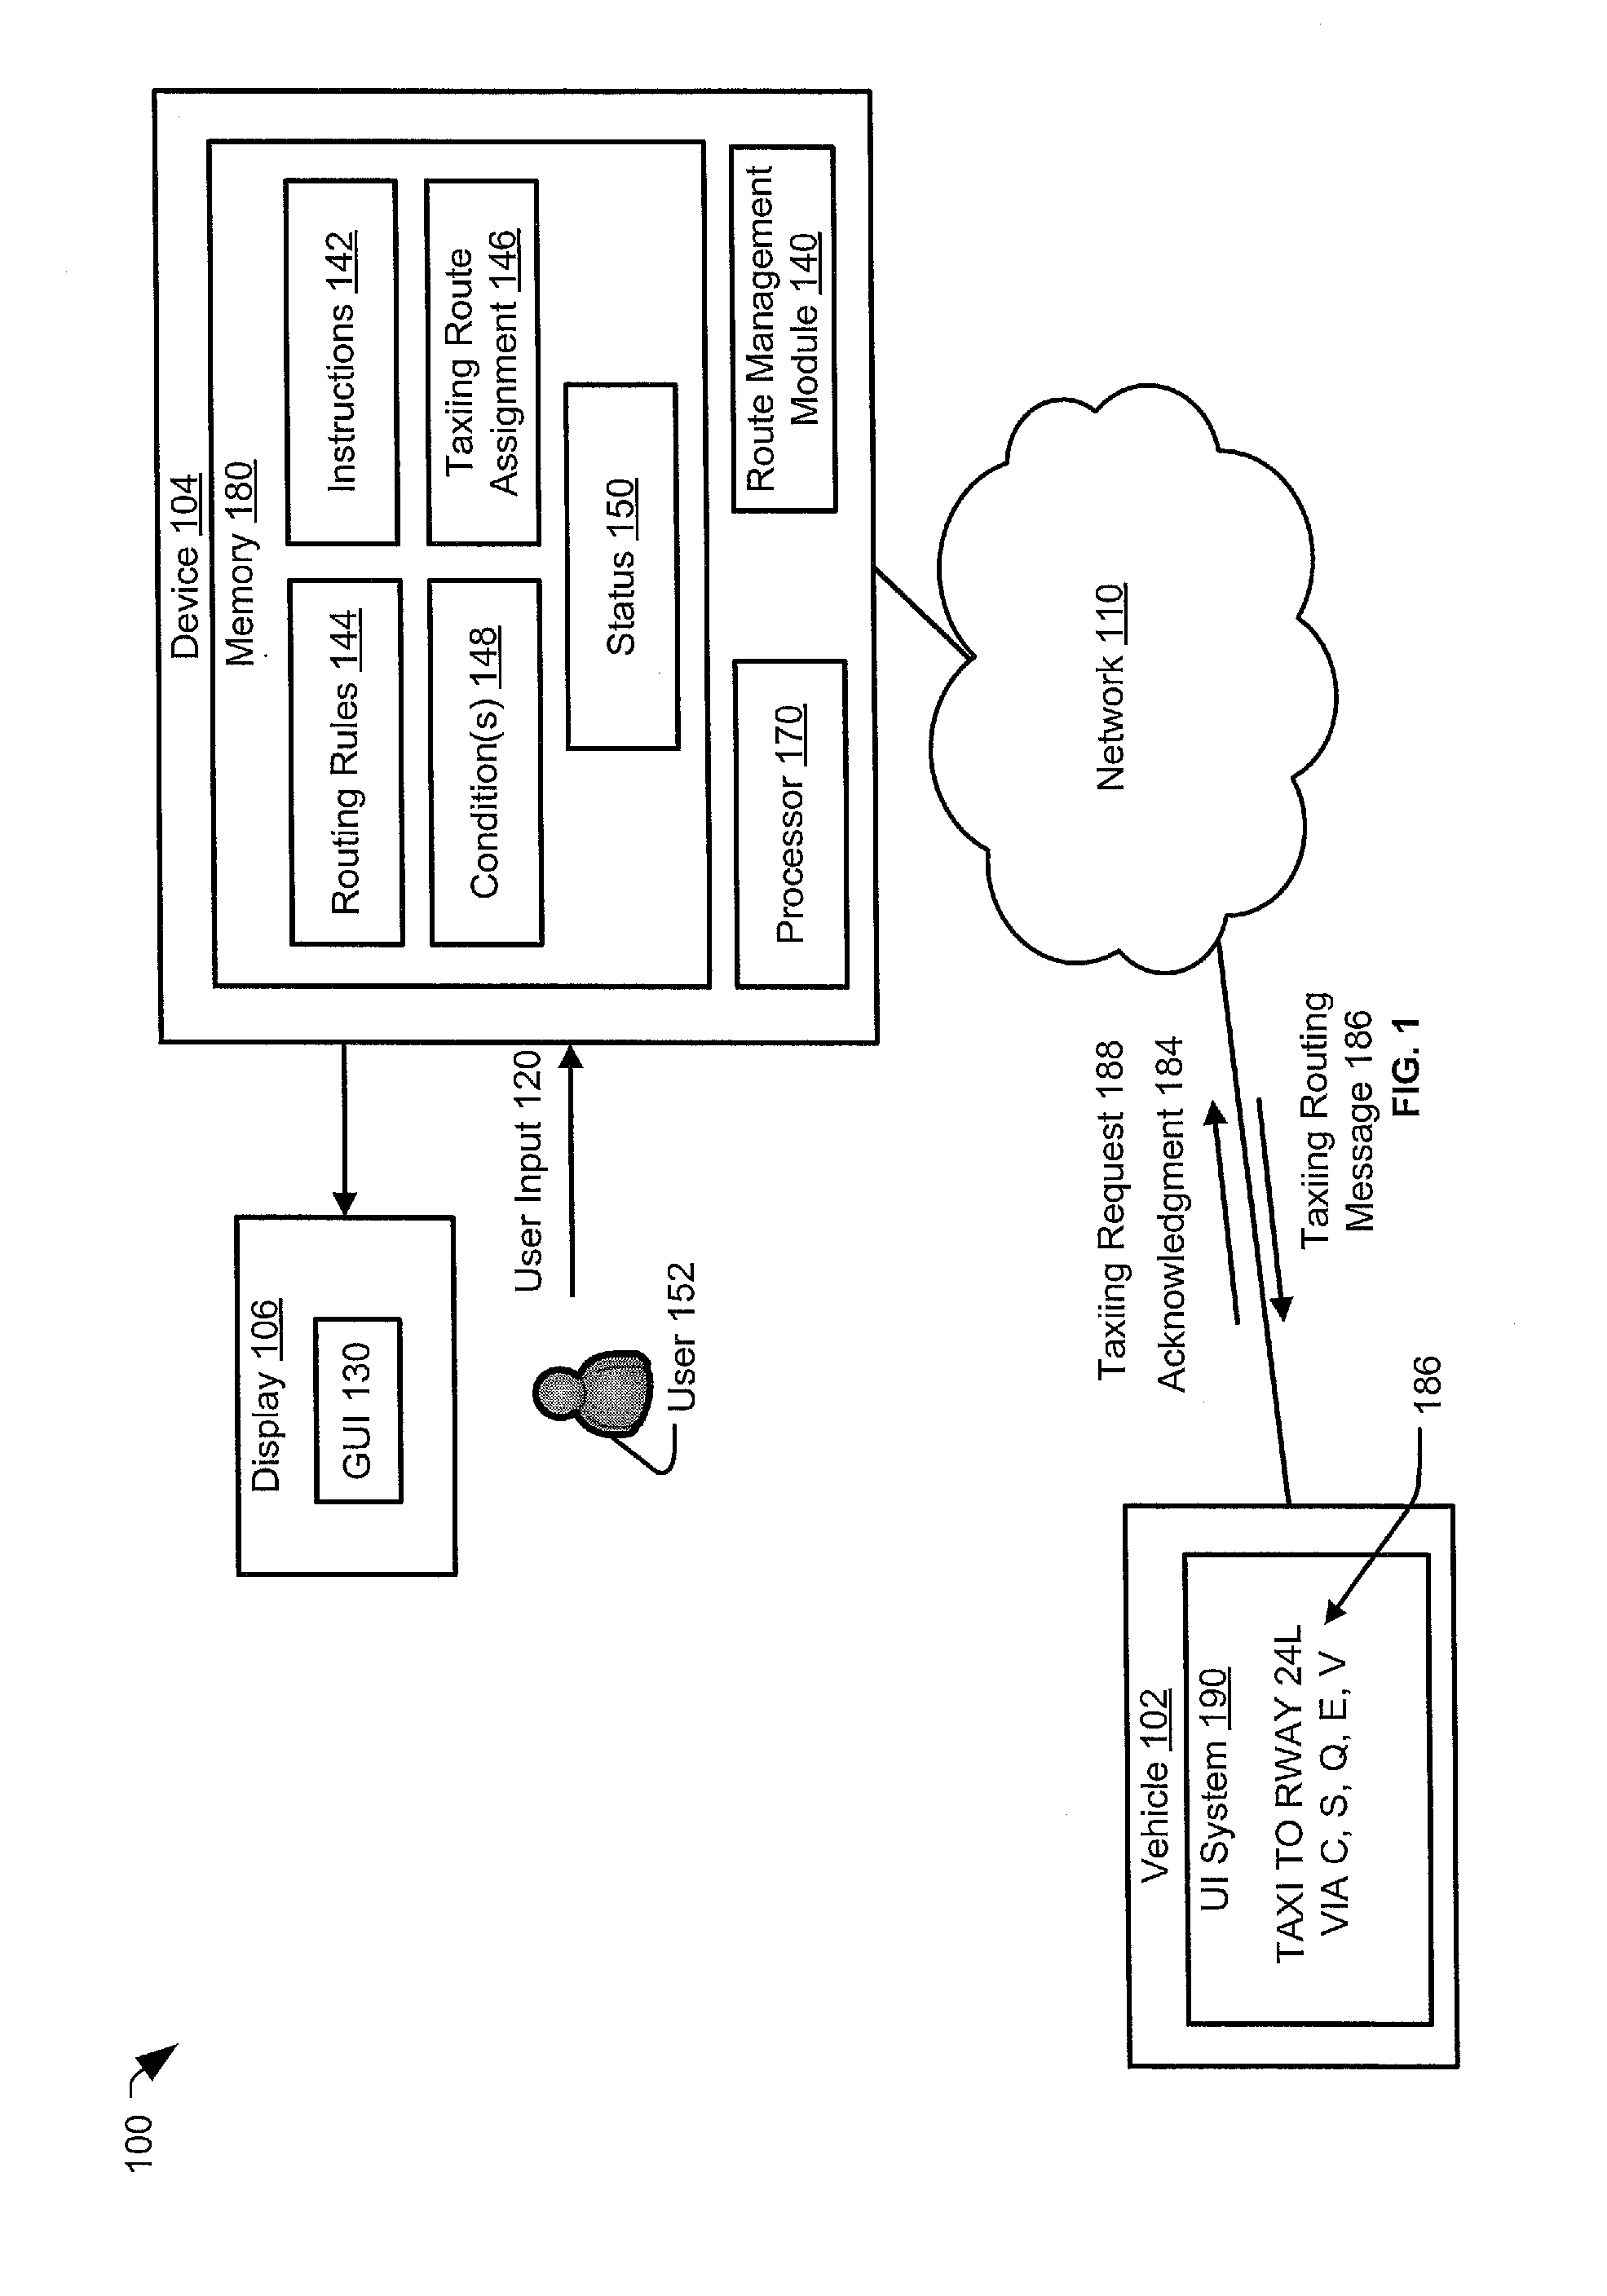 Systems and methods of airport traffic control